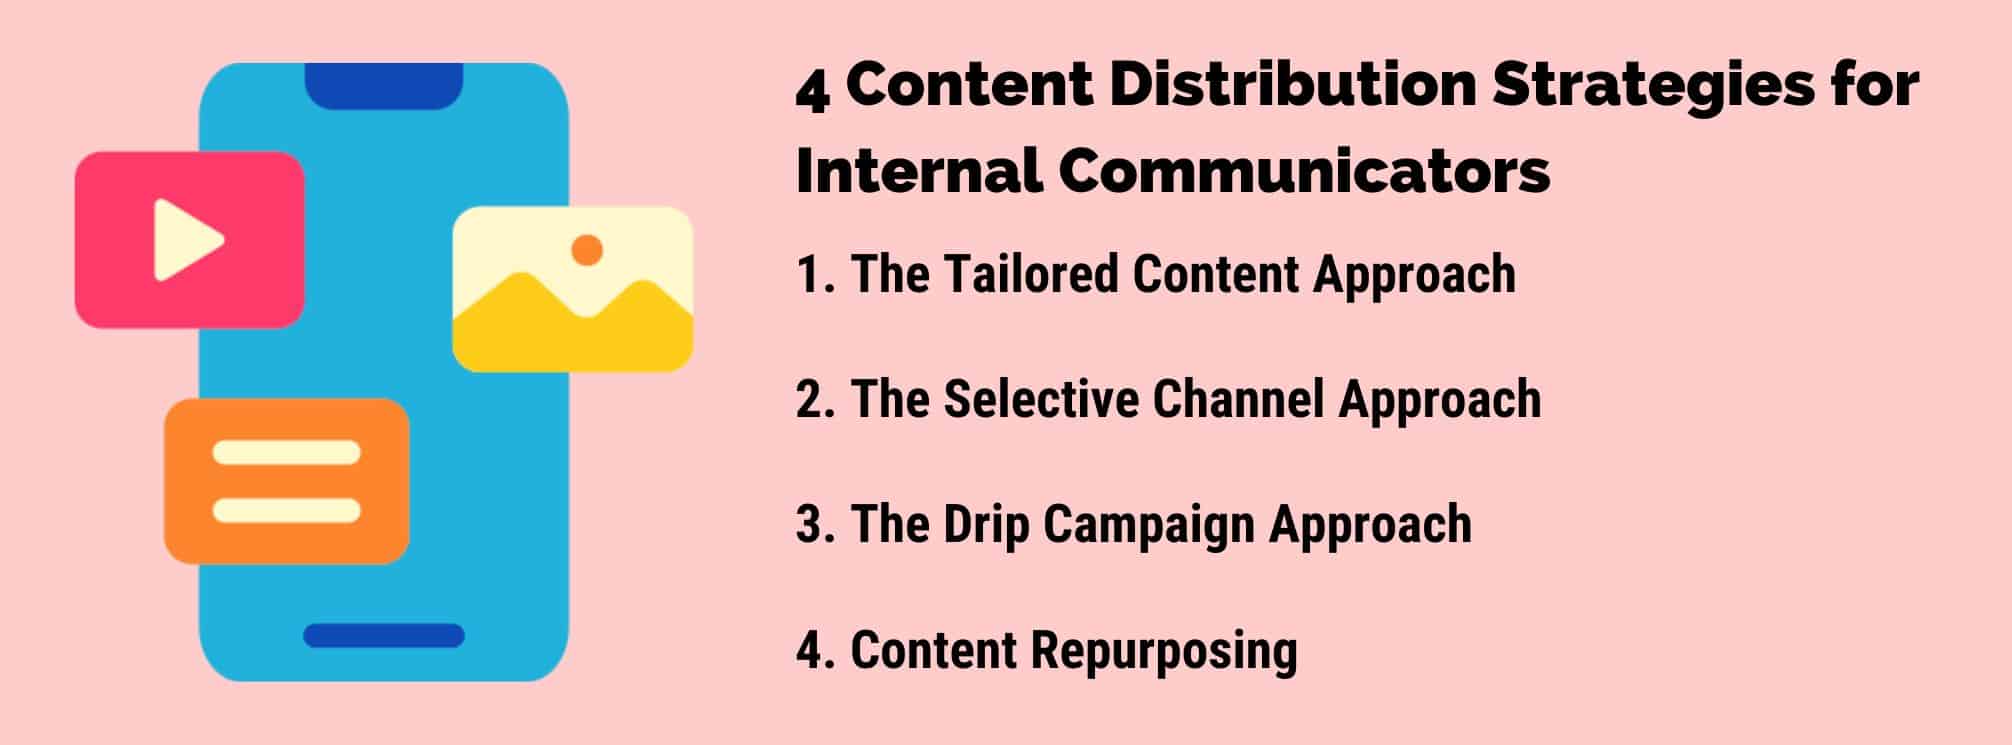 Text-based graphic with the 4 ways to distribute internal comms content.